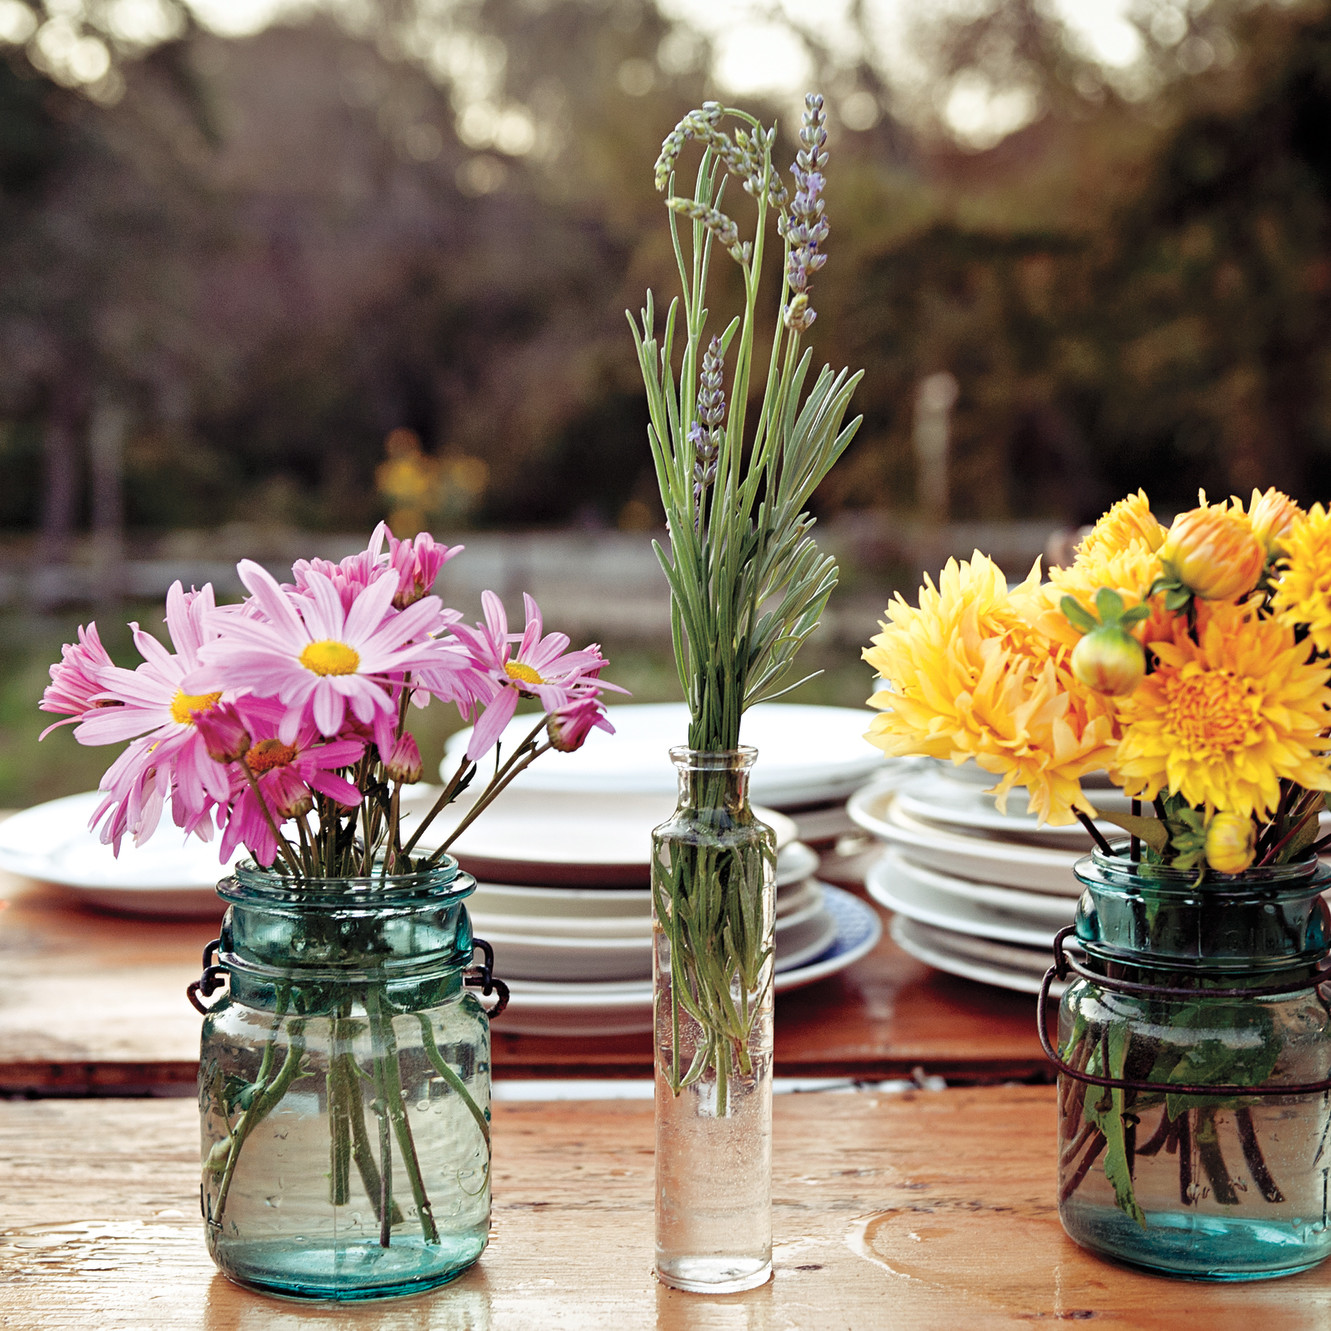 Three vases of flowers on a table featuring home decorating.